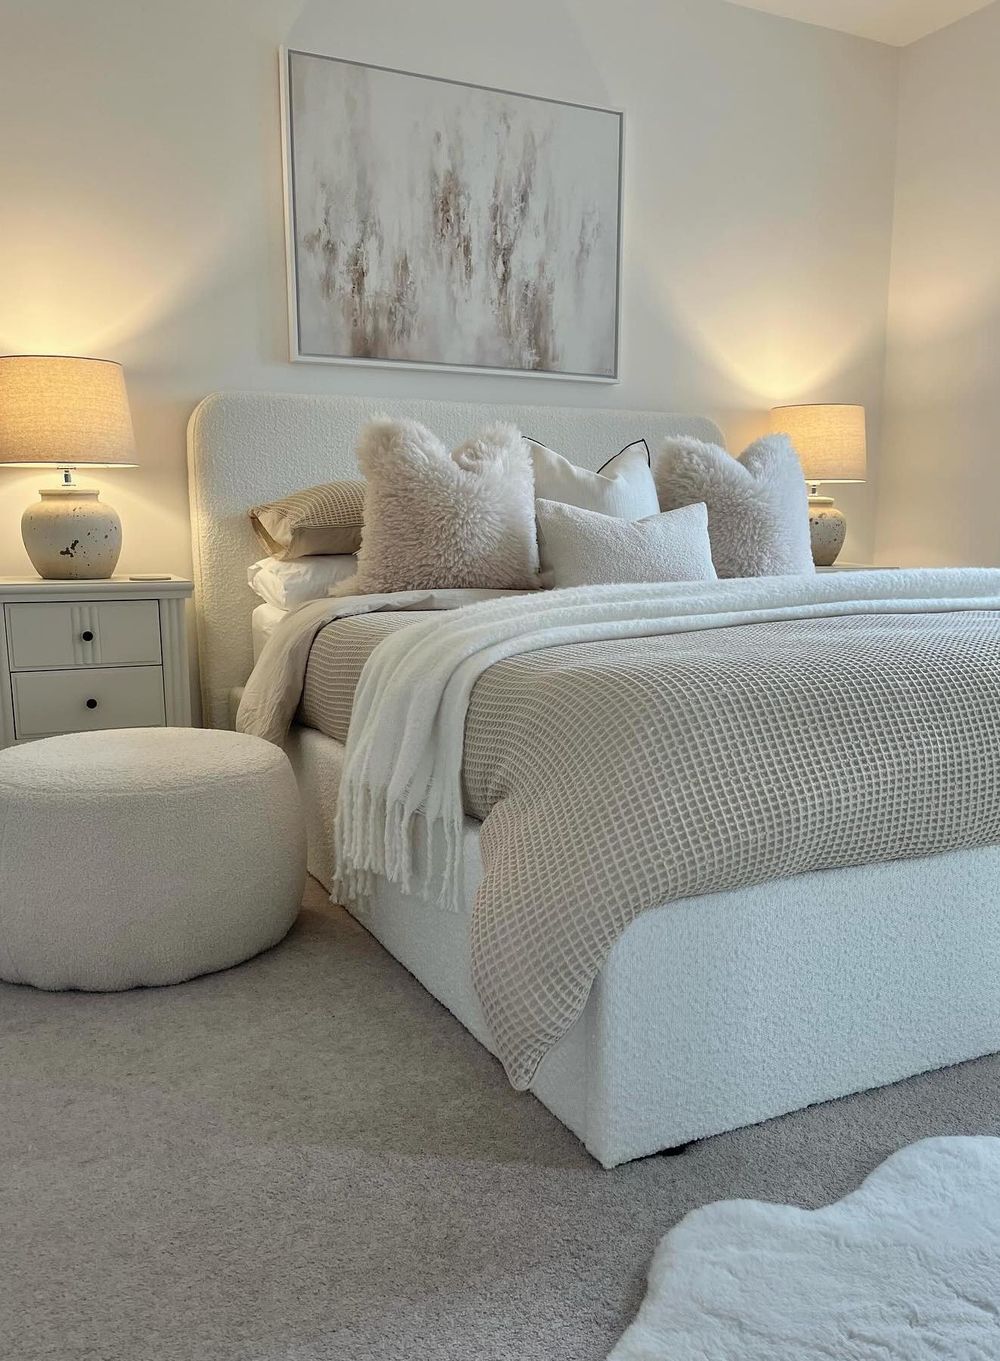 Beige interior Bedroom layered textiles fluffy _myhomeinspo_